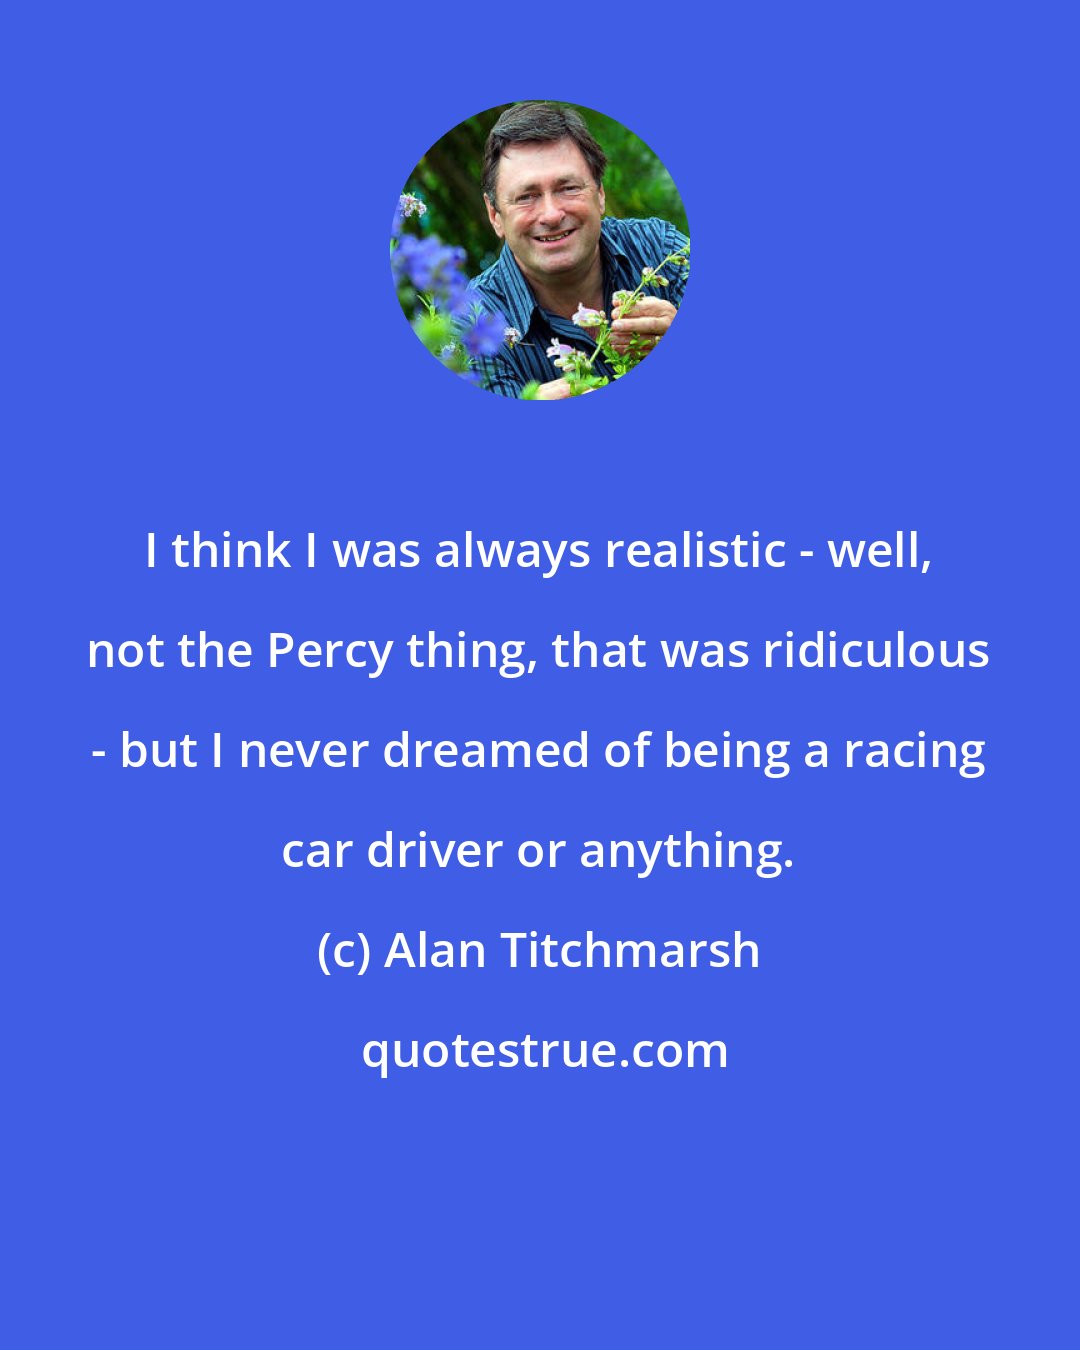 Alan Titchmarsh: I think I was always realistic - well, not the Percy thing, that was ridiculous - but I never dreamed of being a racing car driver or anything.